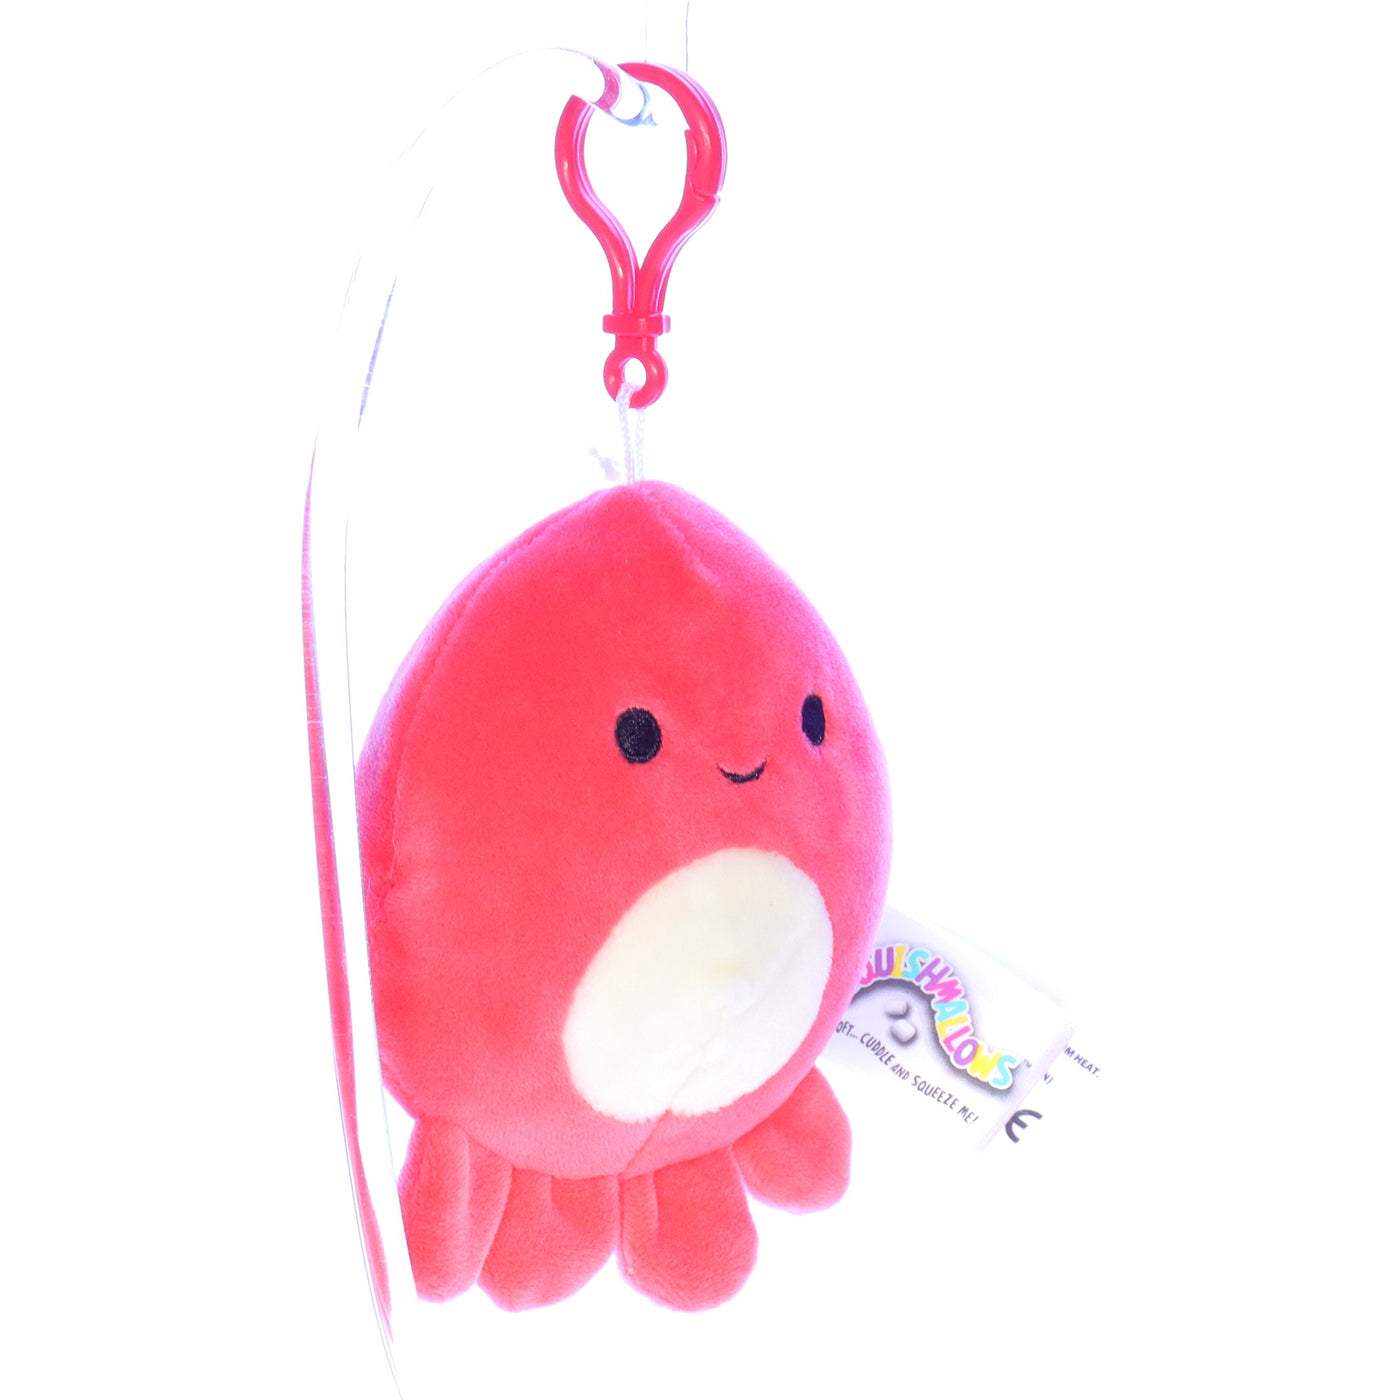 Squishmallows_Q044_Veronica_Keychain_Octopus_Stuffed_Animal_2019 Front Right View